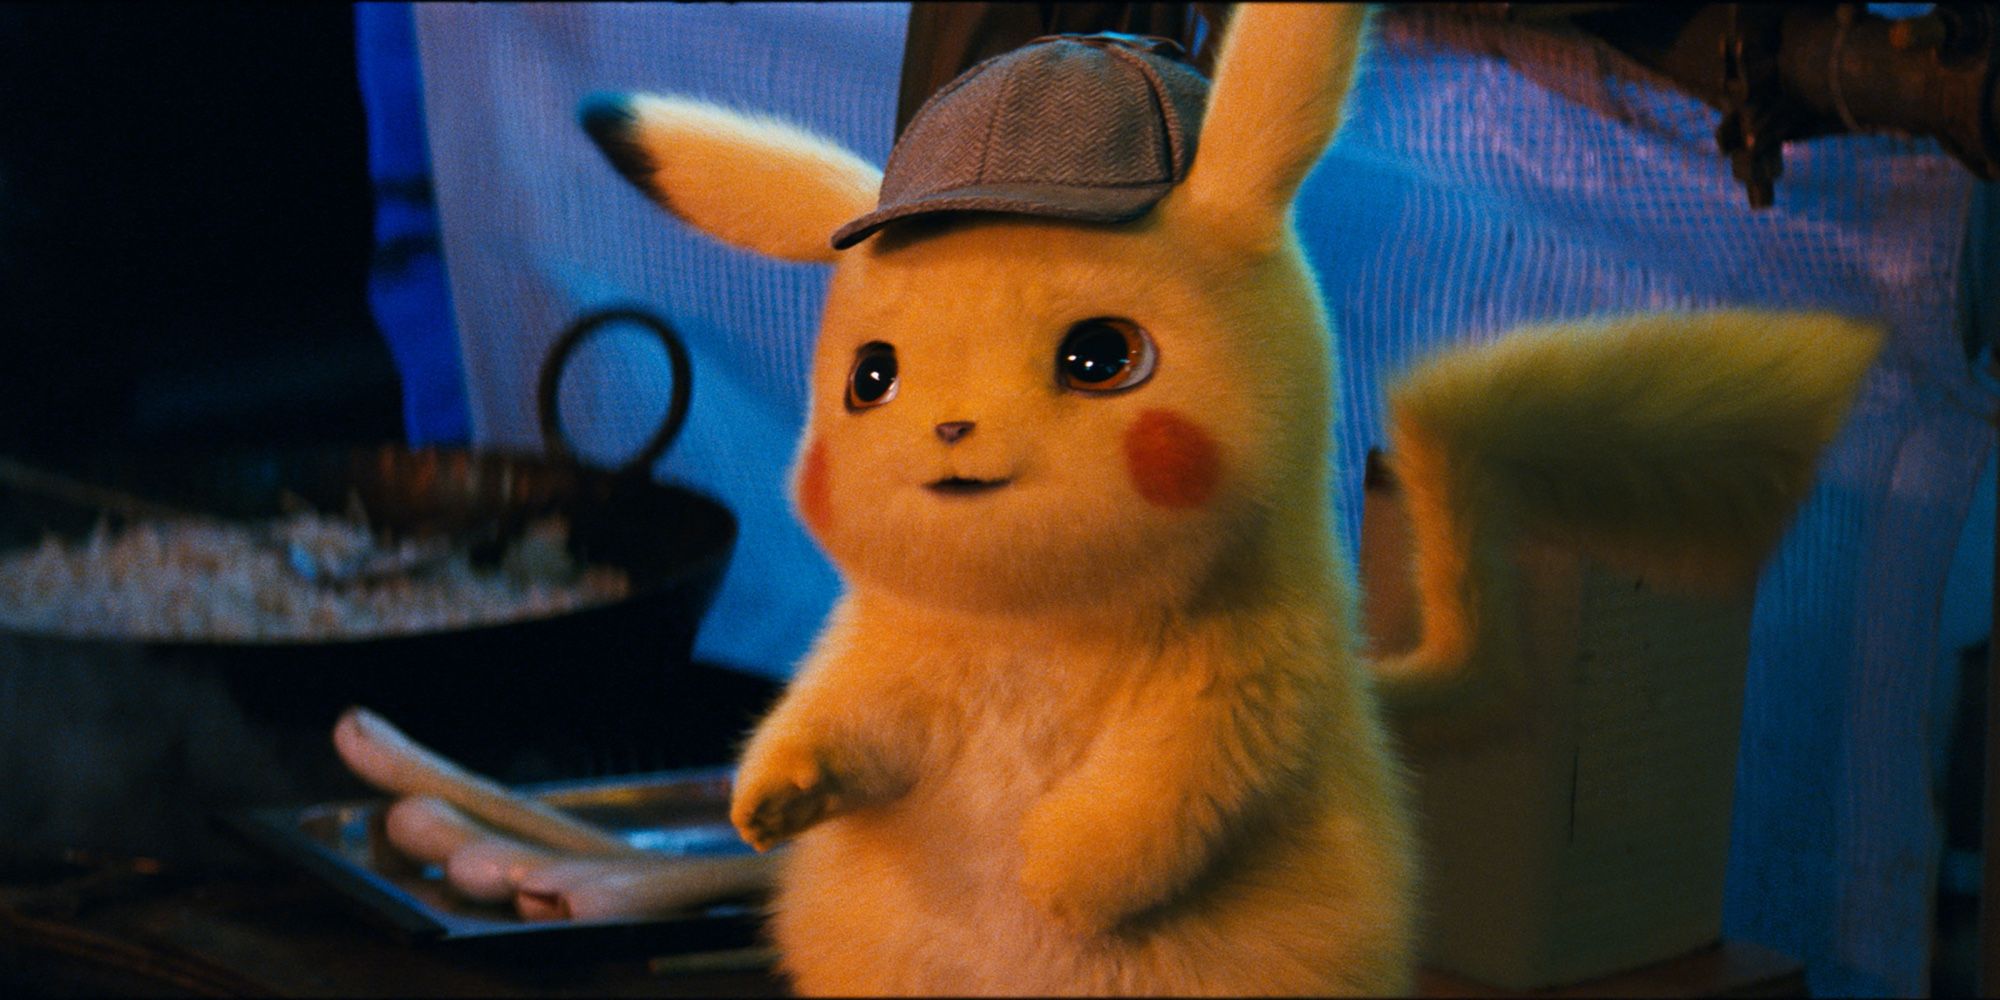 The Internet's Best Reactions and Memes to The New Detective Pikachu